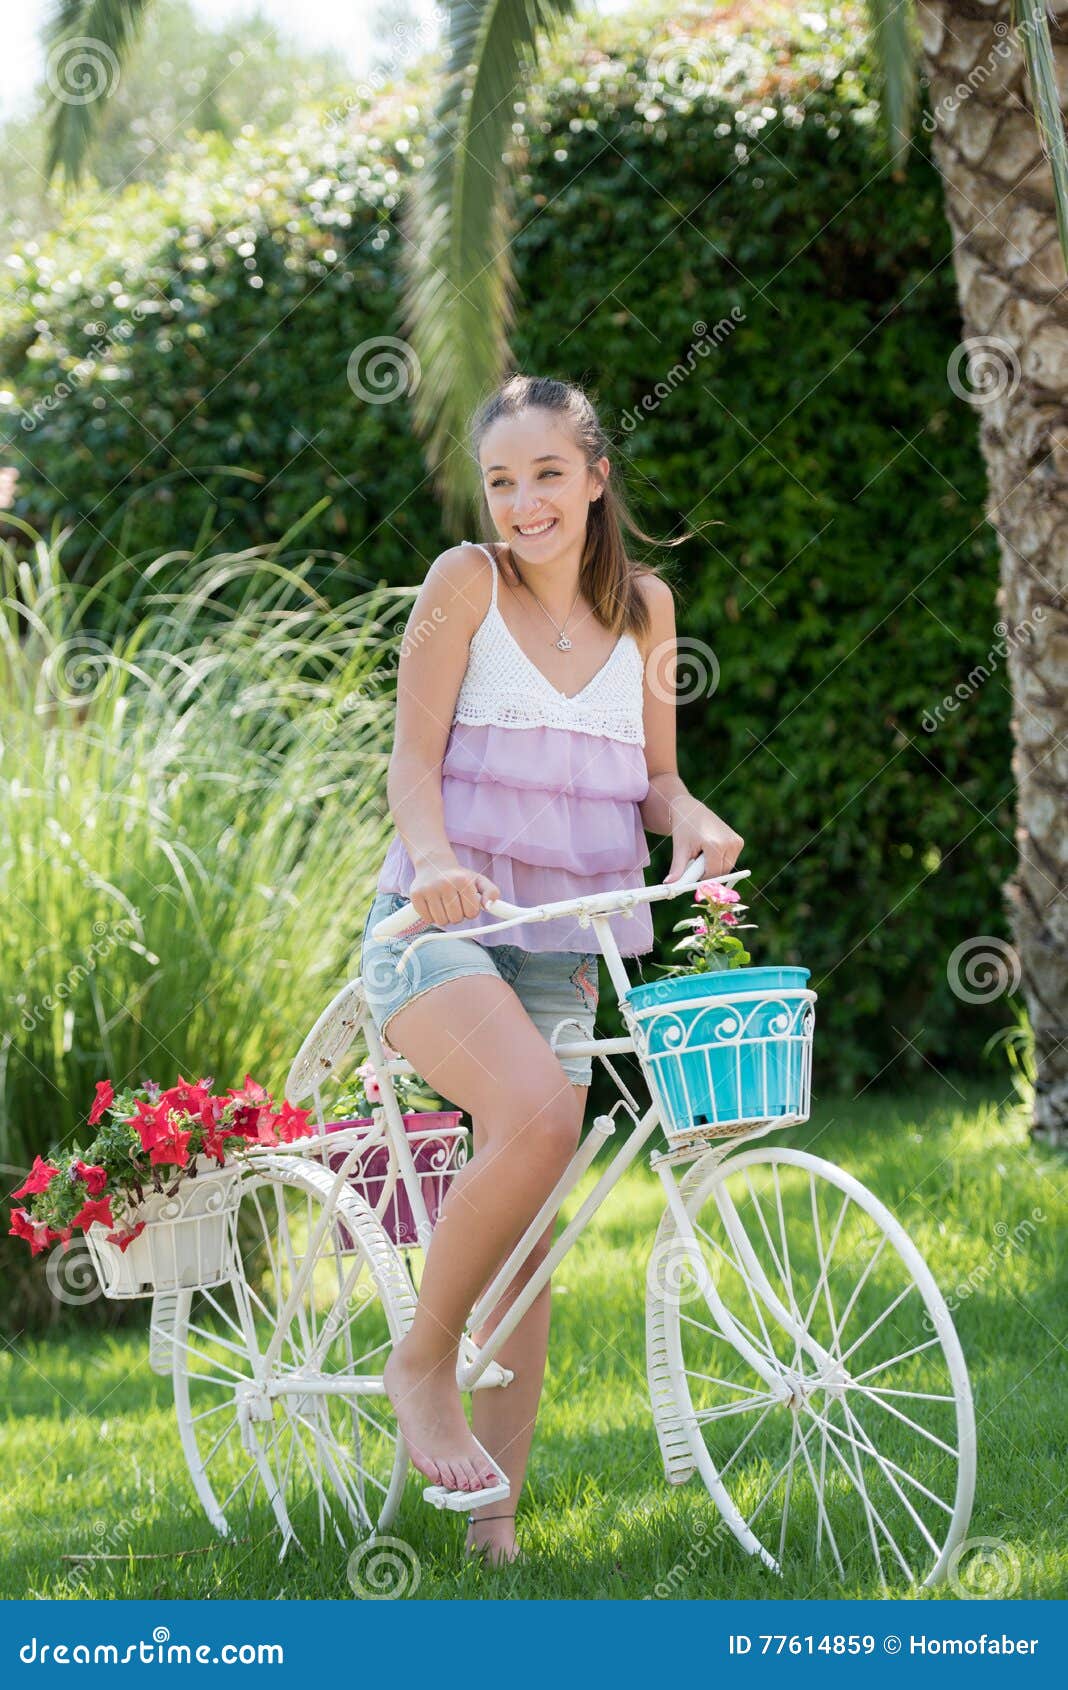 https://thumbs.dreamstime.com/z/beautiful-lady-wear-casual-clothes-leaning-fake-decor-bicycle-ride-flowers-pots-palm-trees-greens-as-background-77614859.jpg